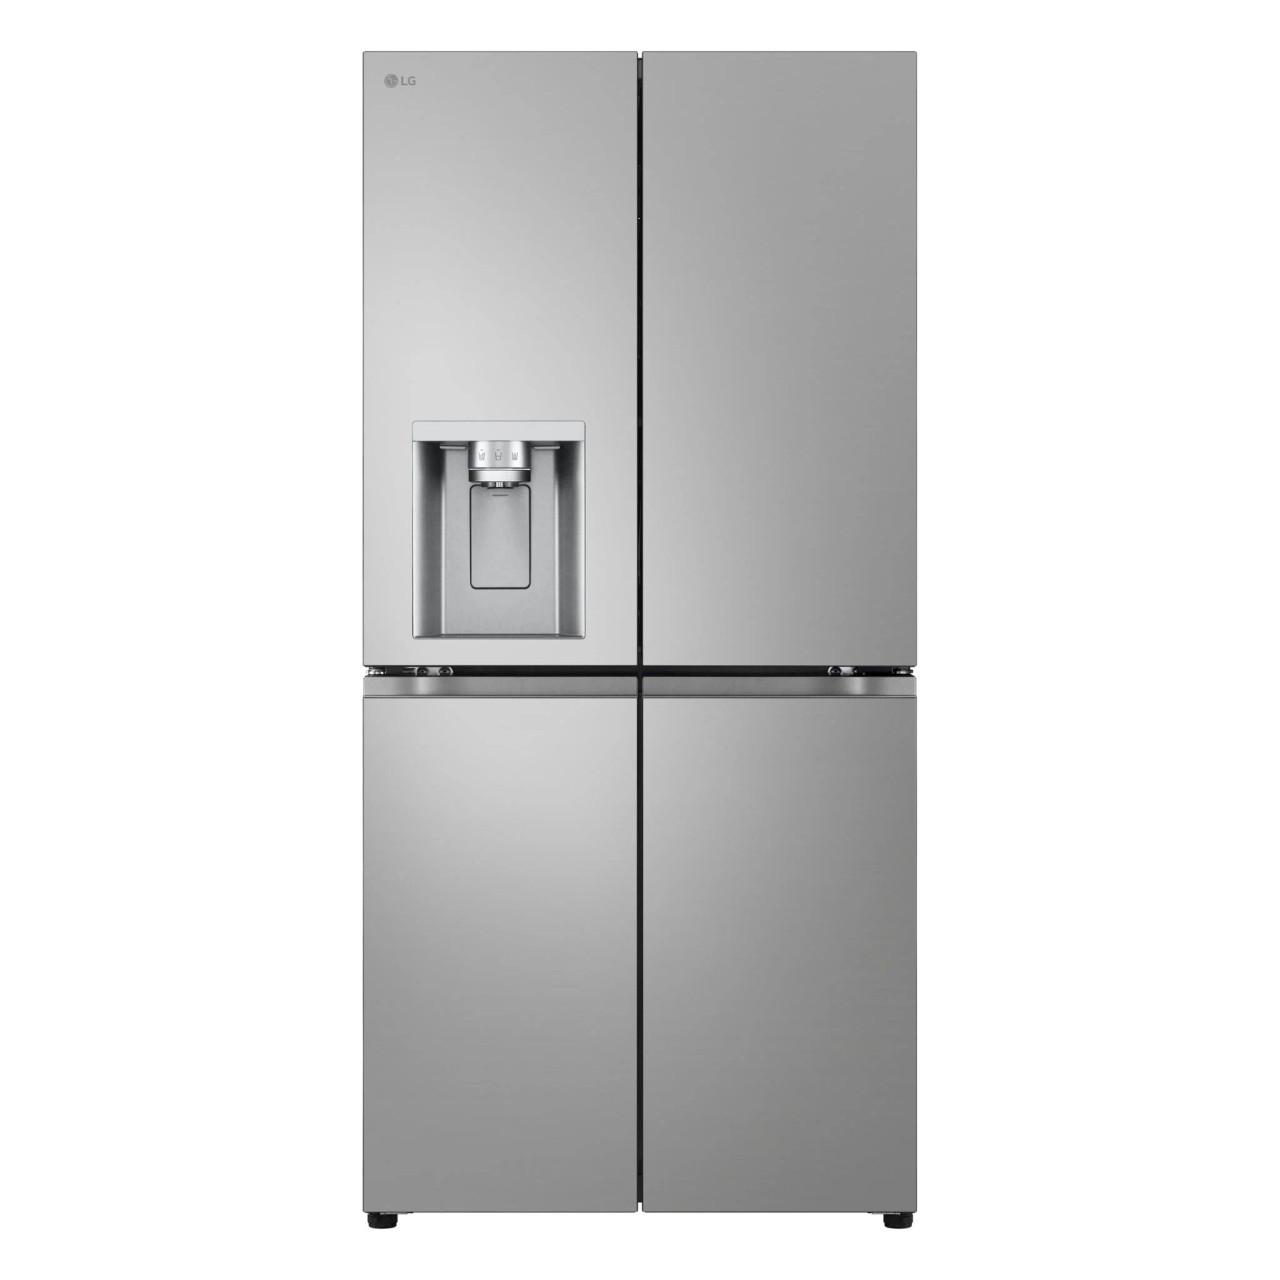 GF-LN500PL - 508L Slim French Door Fridge with Non-Plumbed Ice & Water Dispenser - Stainless Finish